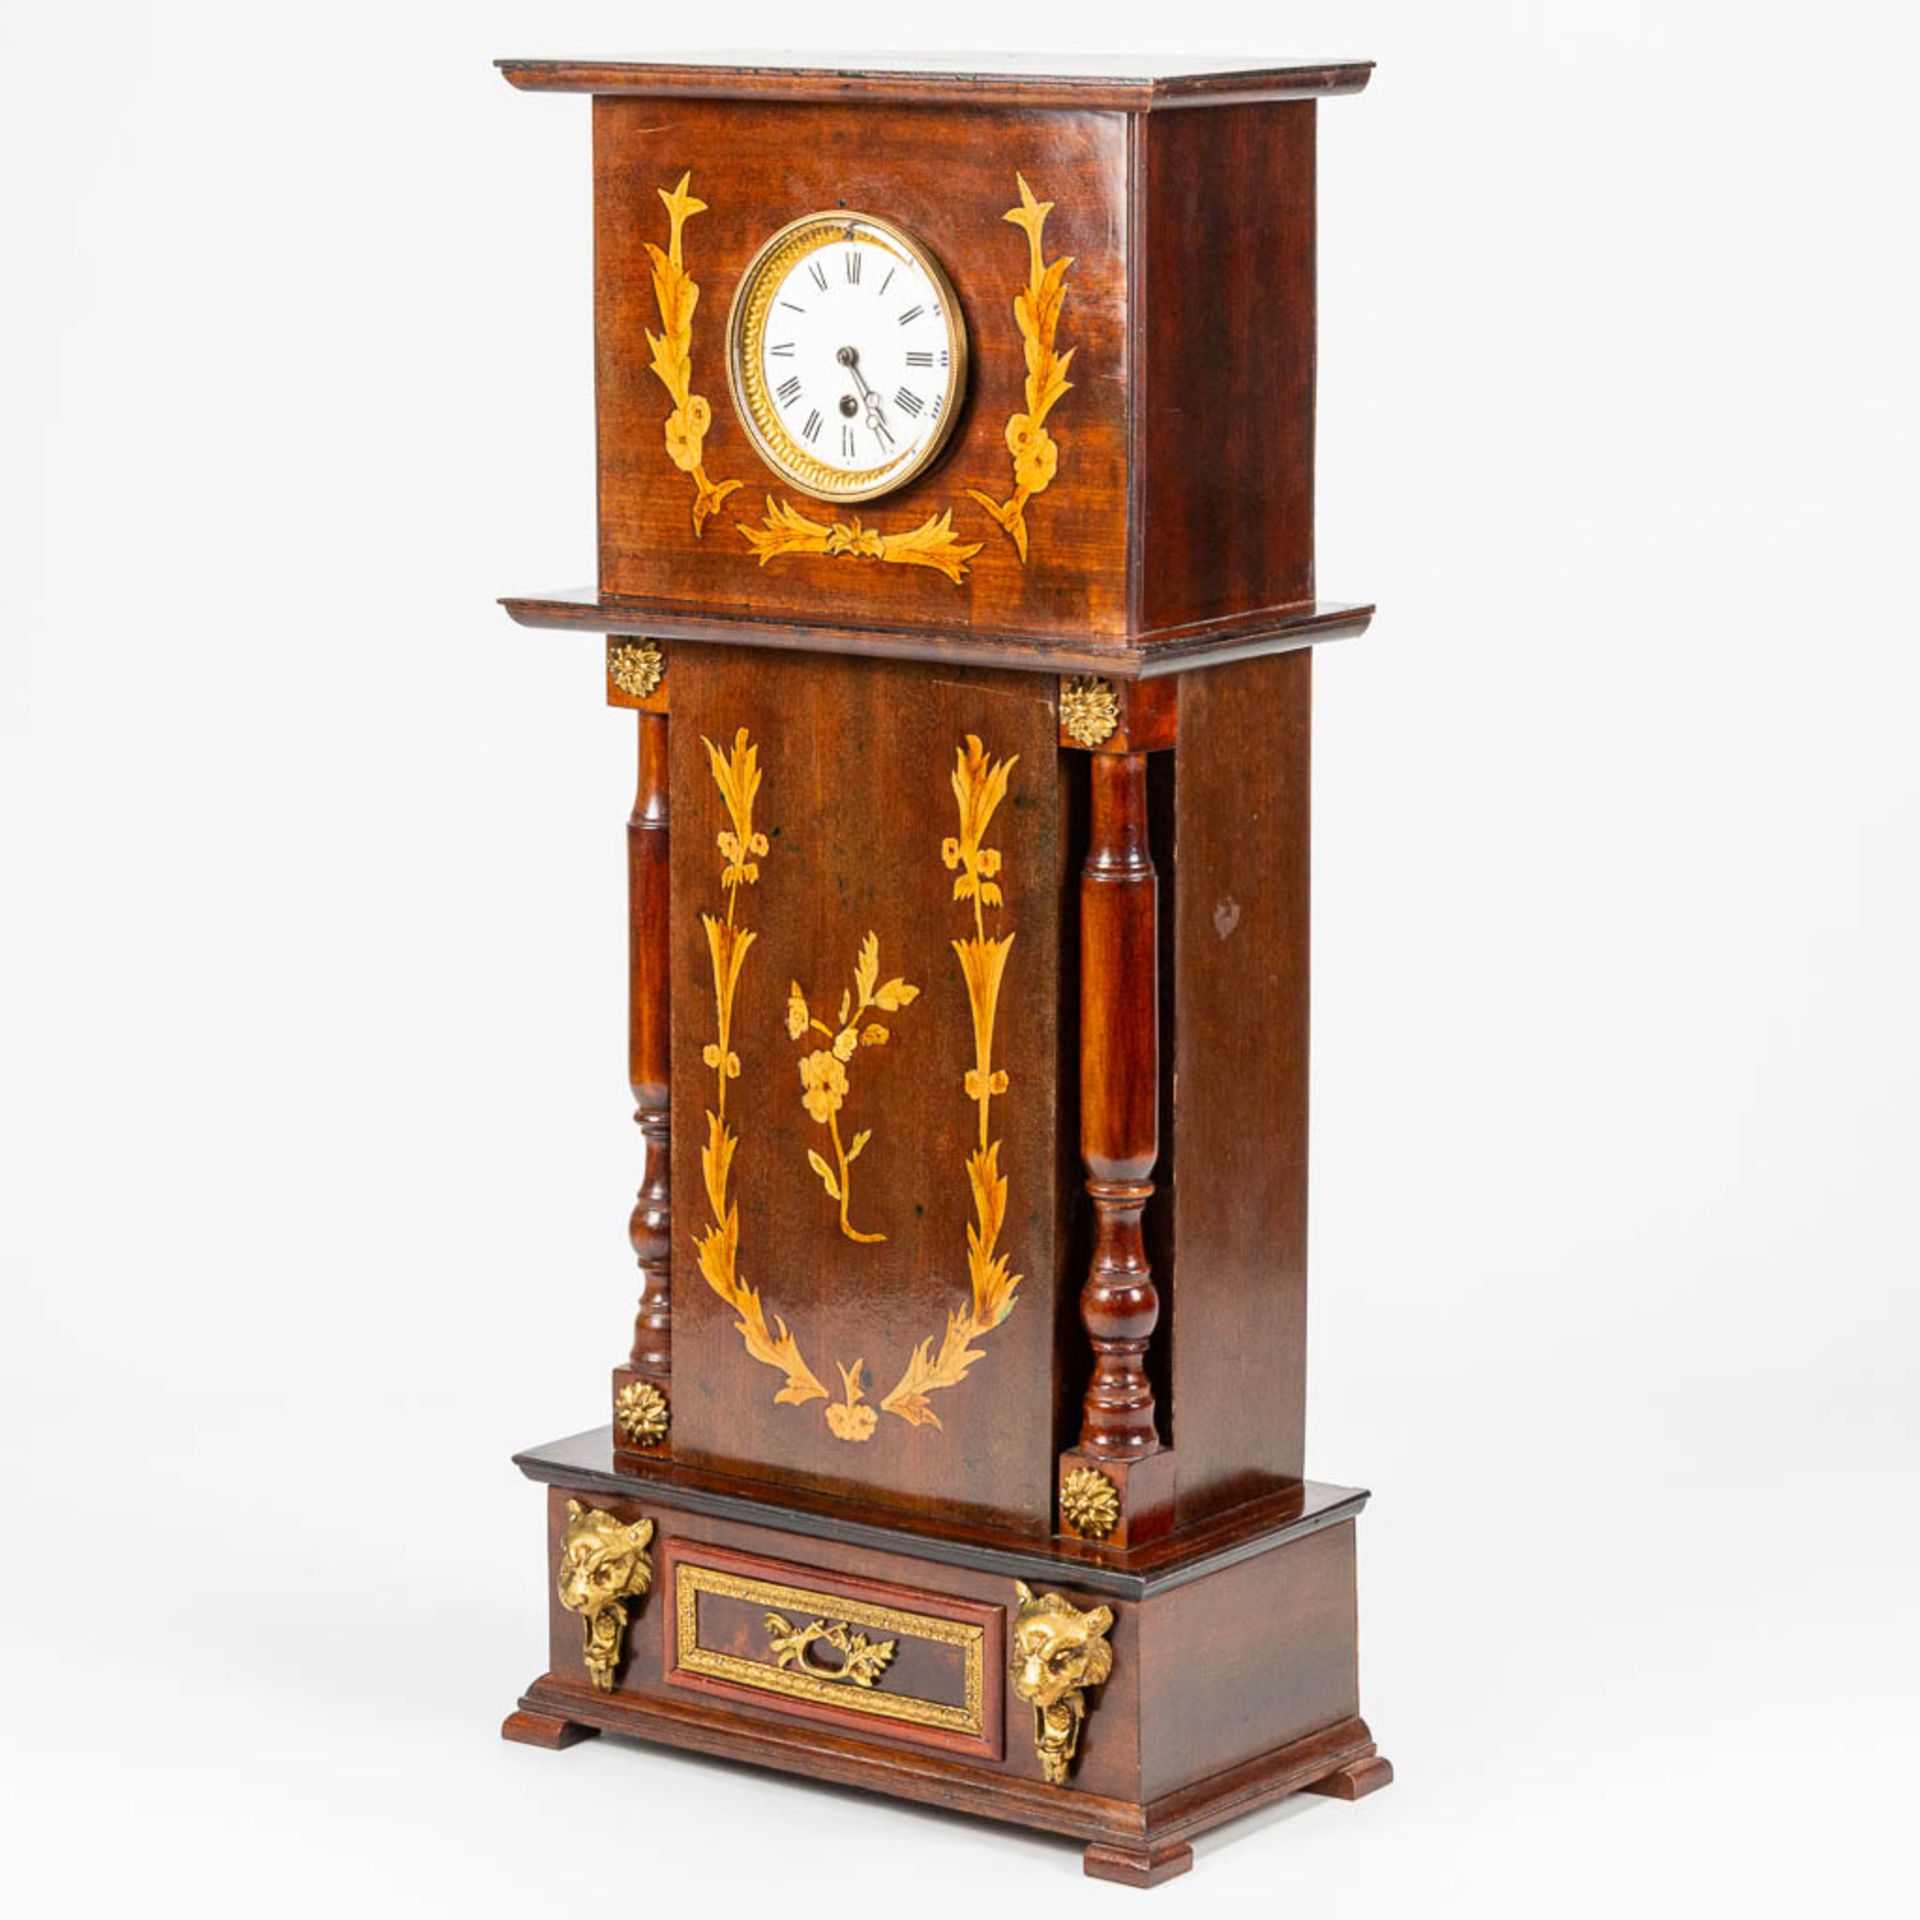 A table clock made of marquetry inlay, 19th century clock in a 20th century case. (17,5 x 34 x 73 cm - Image 8 of 16